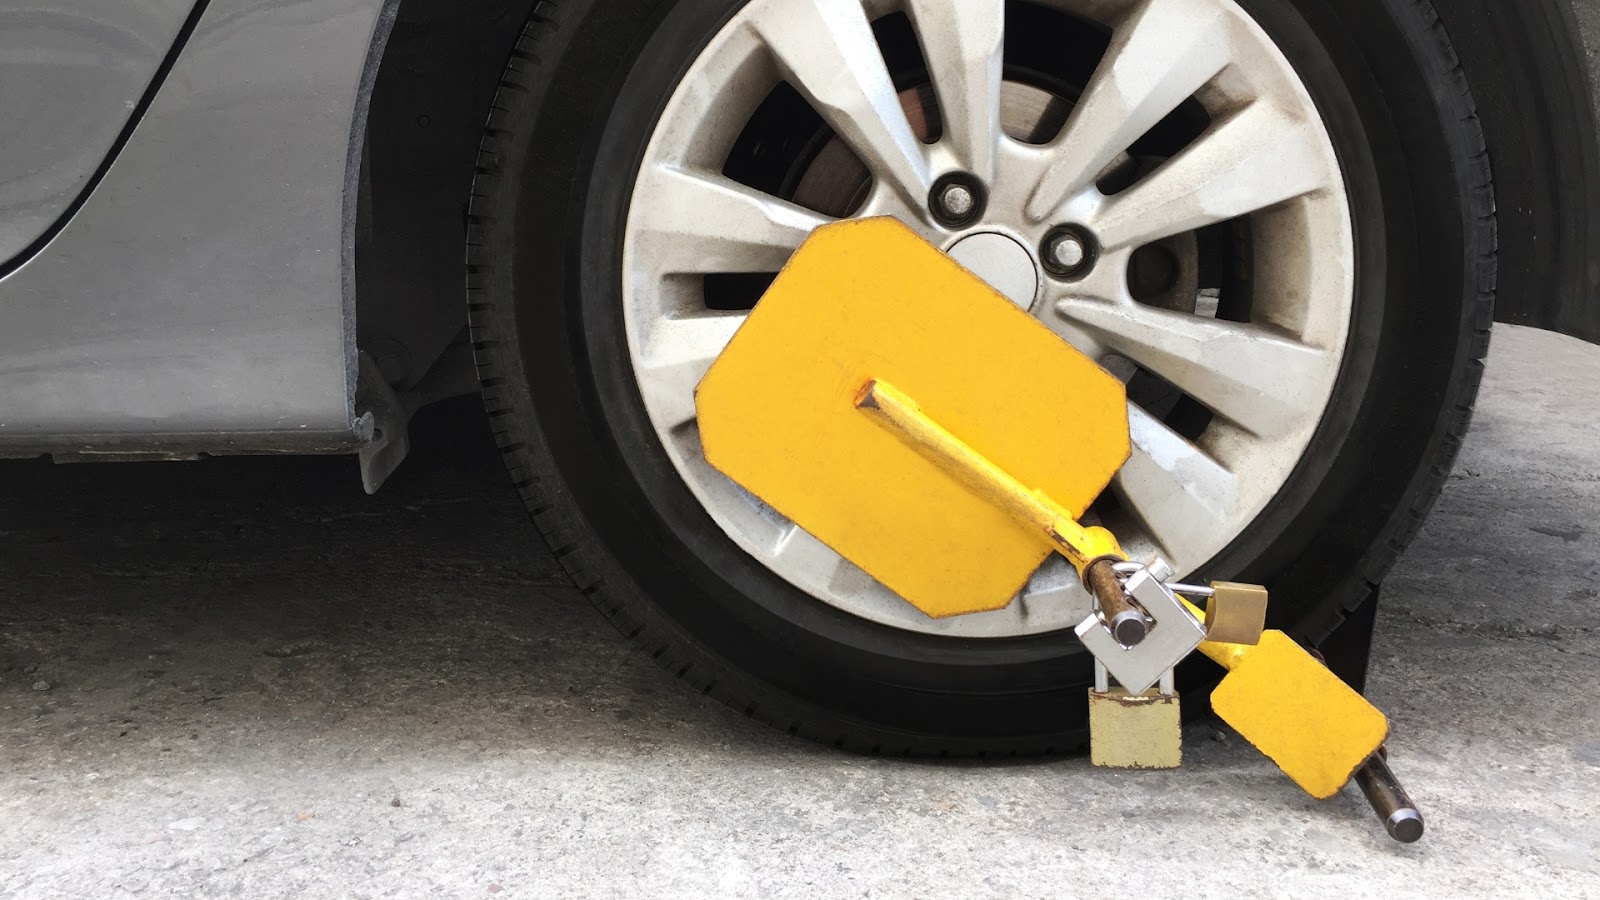 Tire locks are one of the most effective anti-theft devices